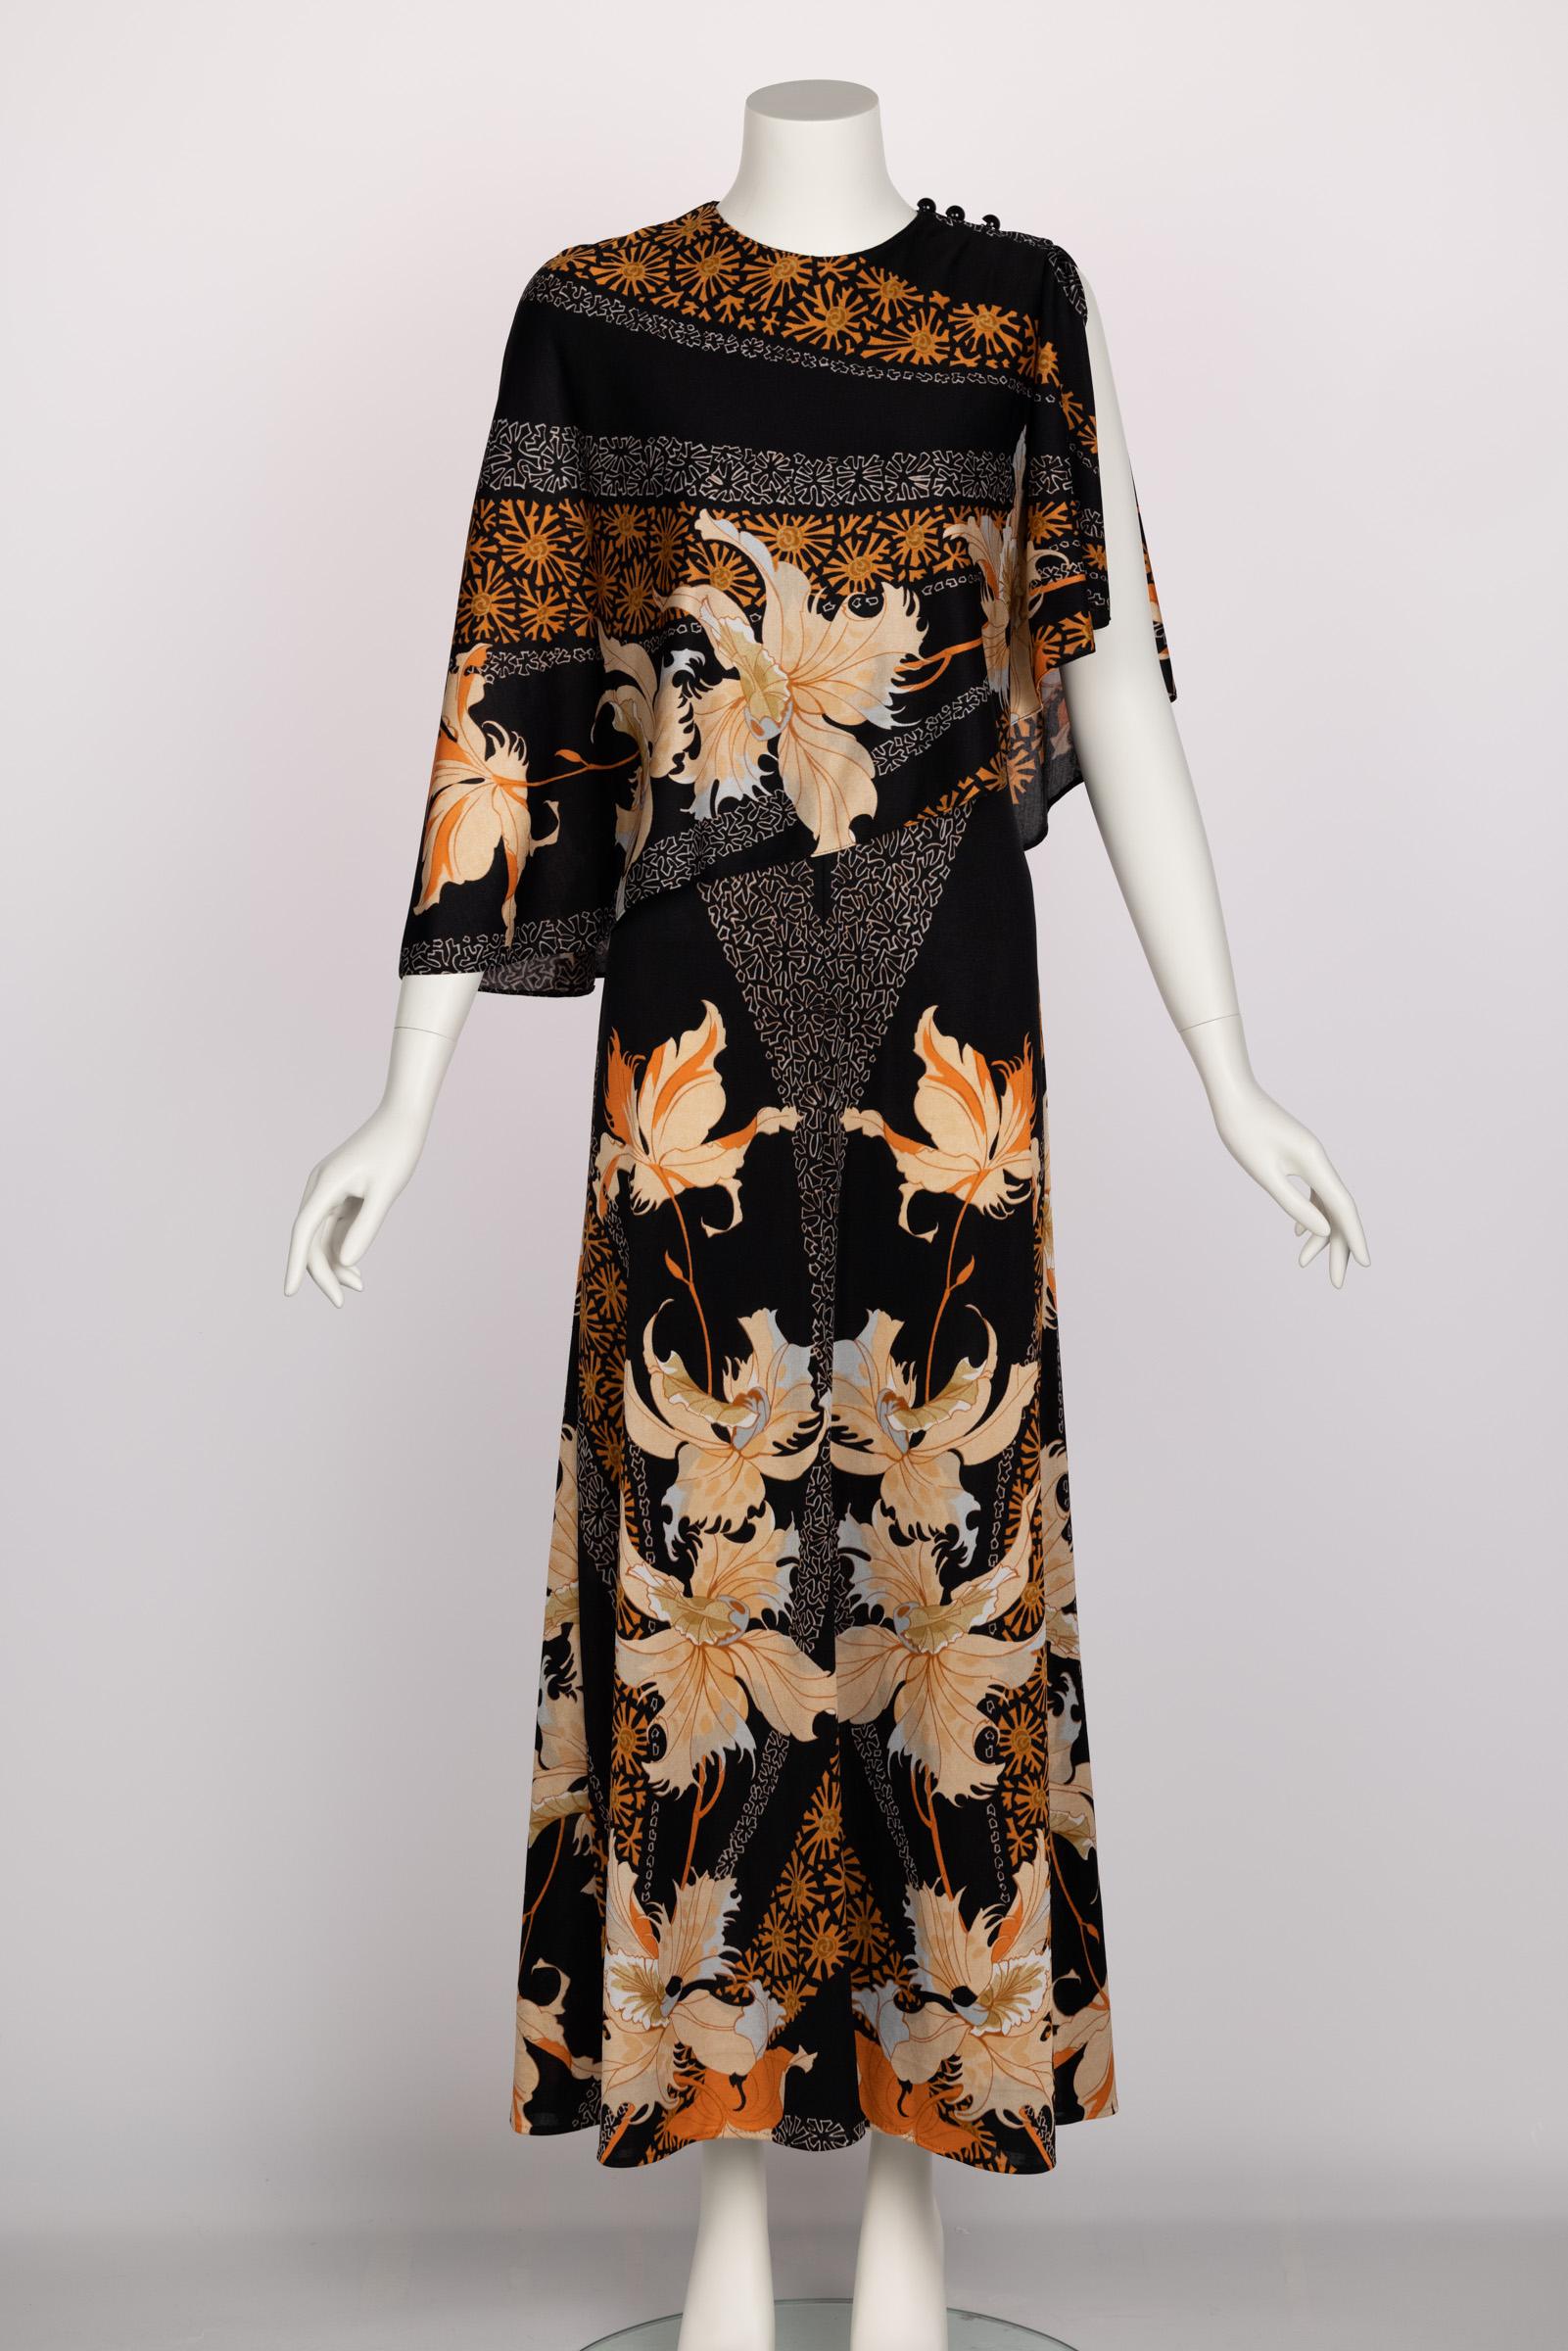 In collaboration with the renowned Paris house of prints, Leonard, the graphic and print designer Mac Tac offered this zany, almost surrealist print for this 1970s silk nylon jersey maxi dress. The print also features large orchids throughout, which